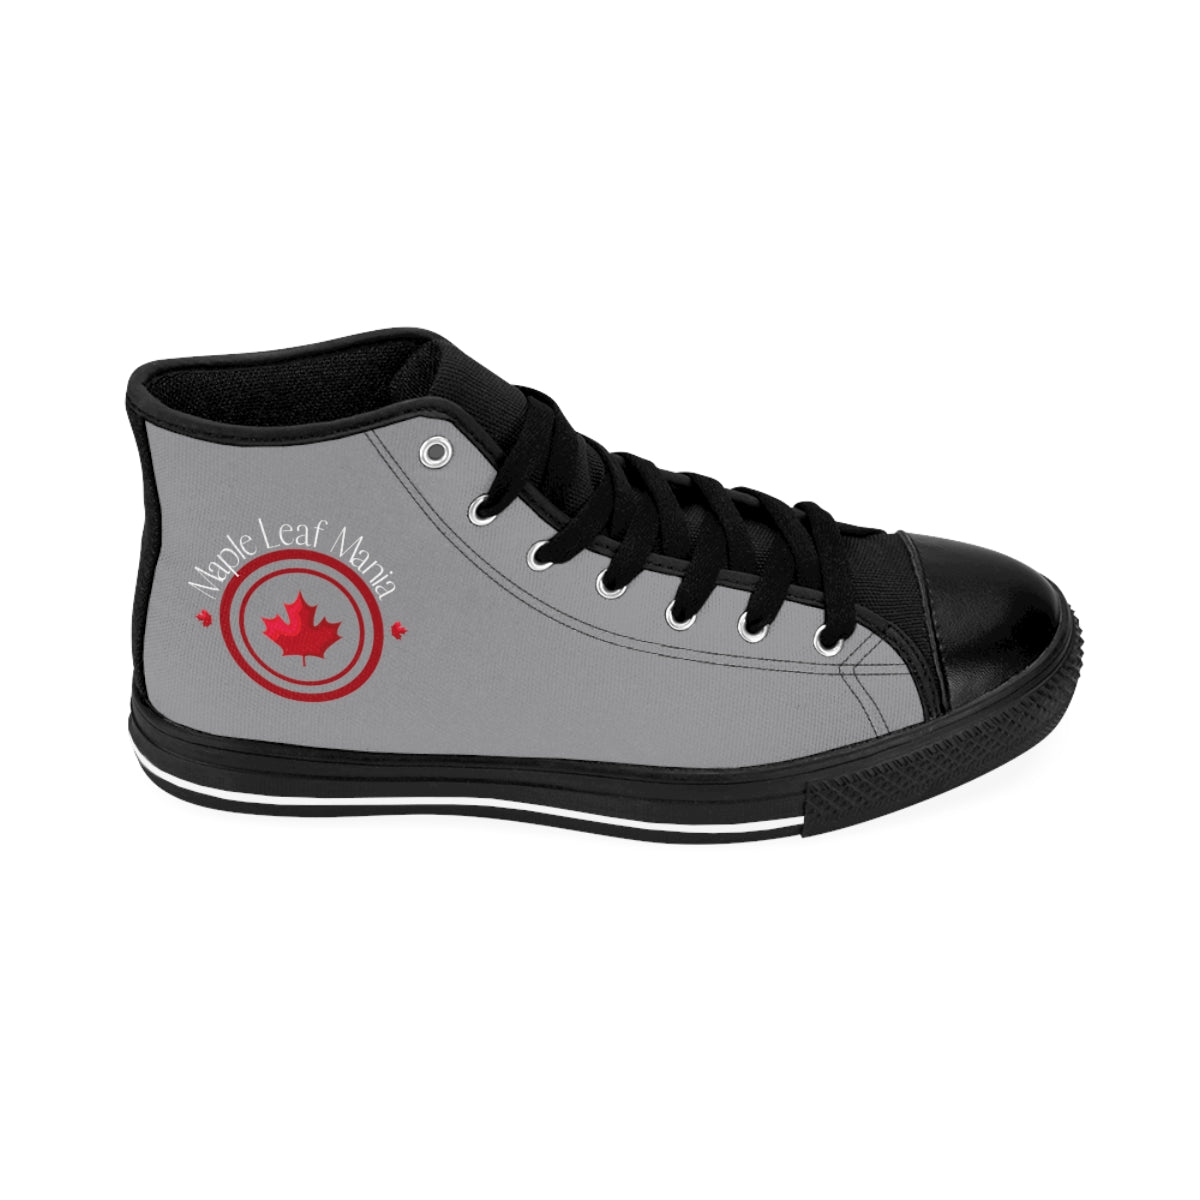 MEN'S HIGH TOP CLASSIC SNEAKERS, MAPLE LEAF MANIA SNEAKERS, BLACK HIGH TOP SNEAKERS GRAY